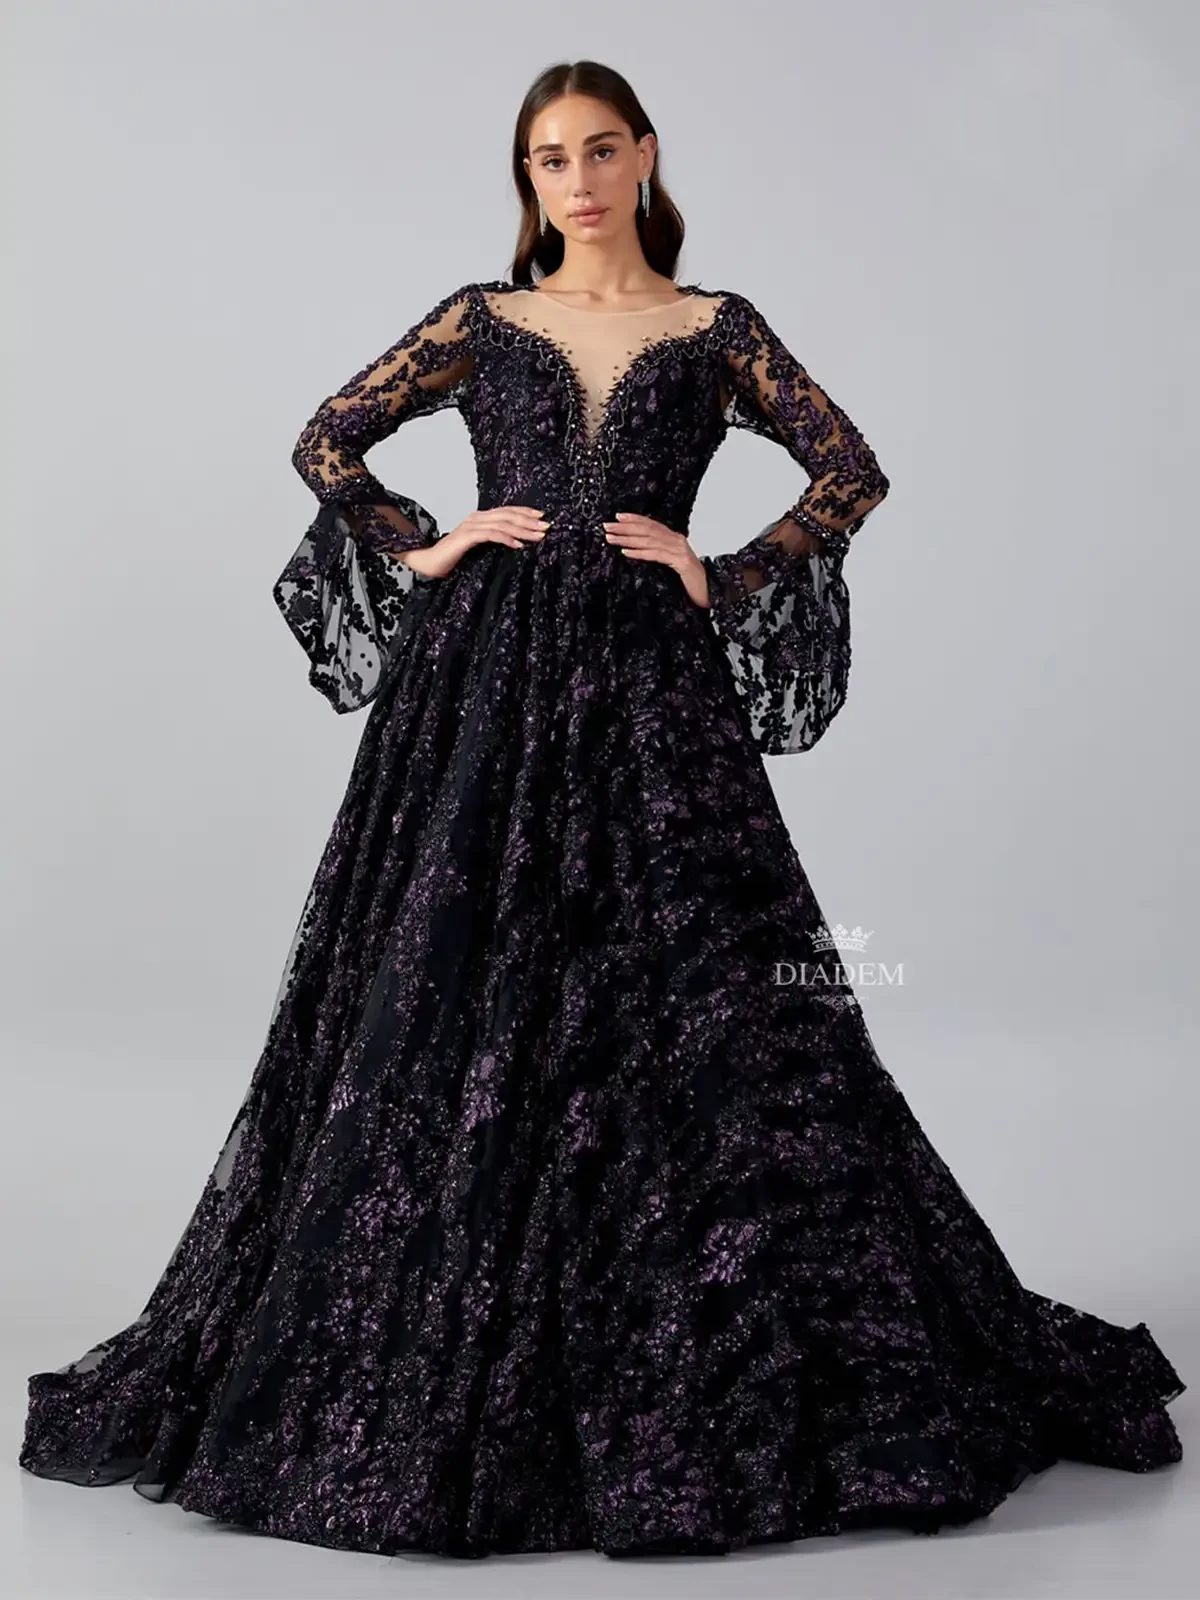 Black Gown Embellished With Laces And Beads In Floral Designs